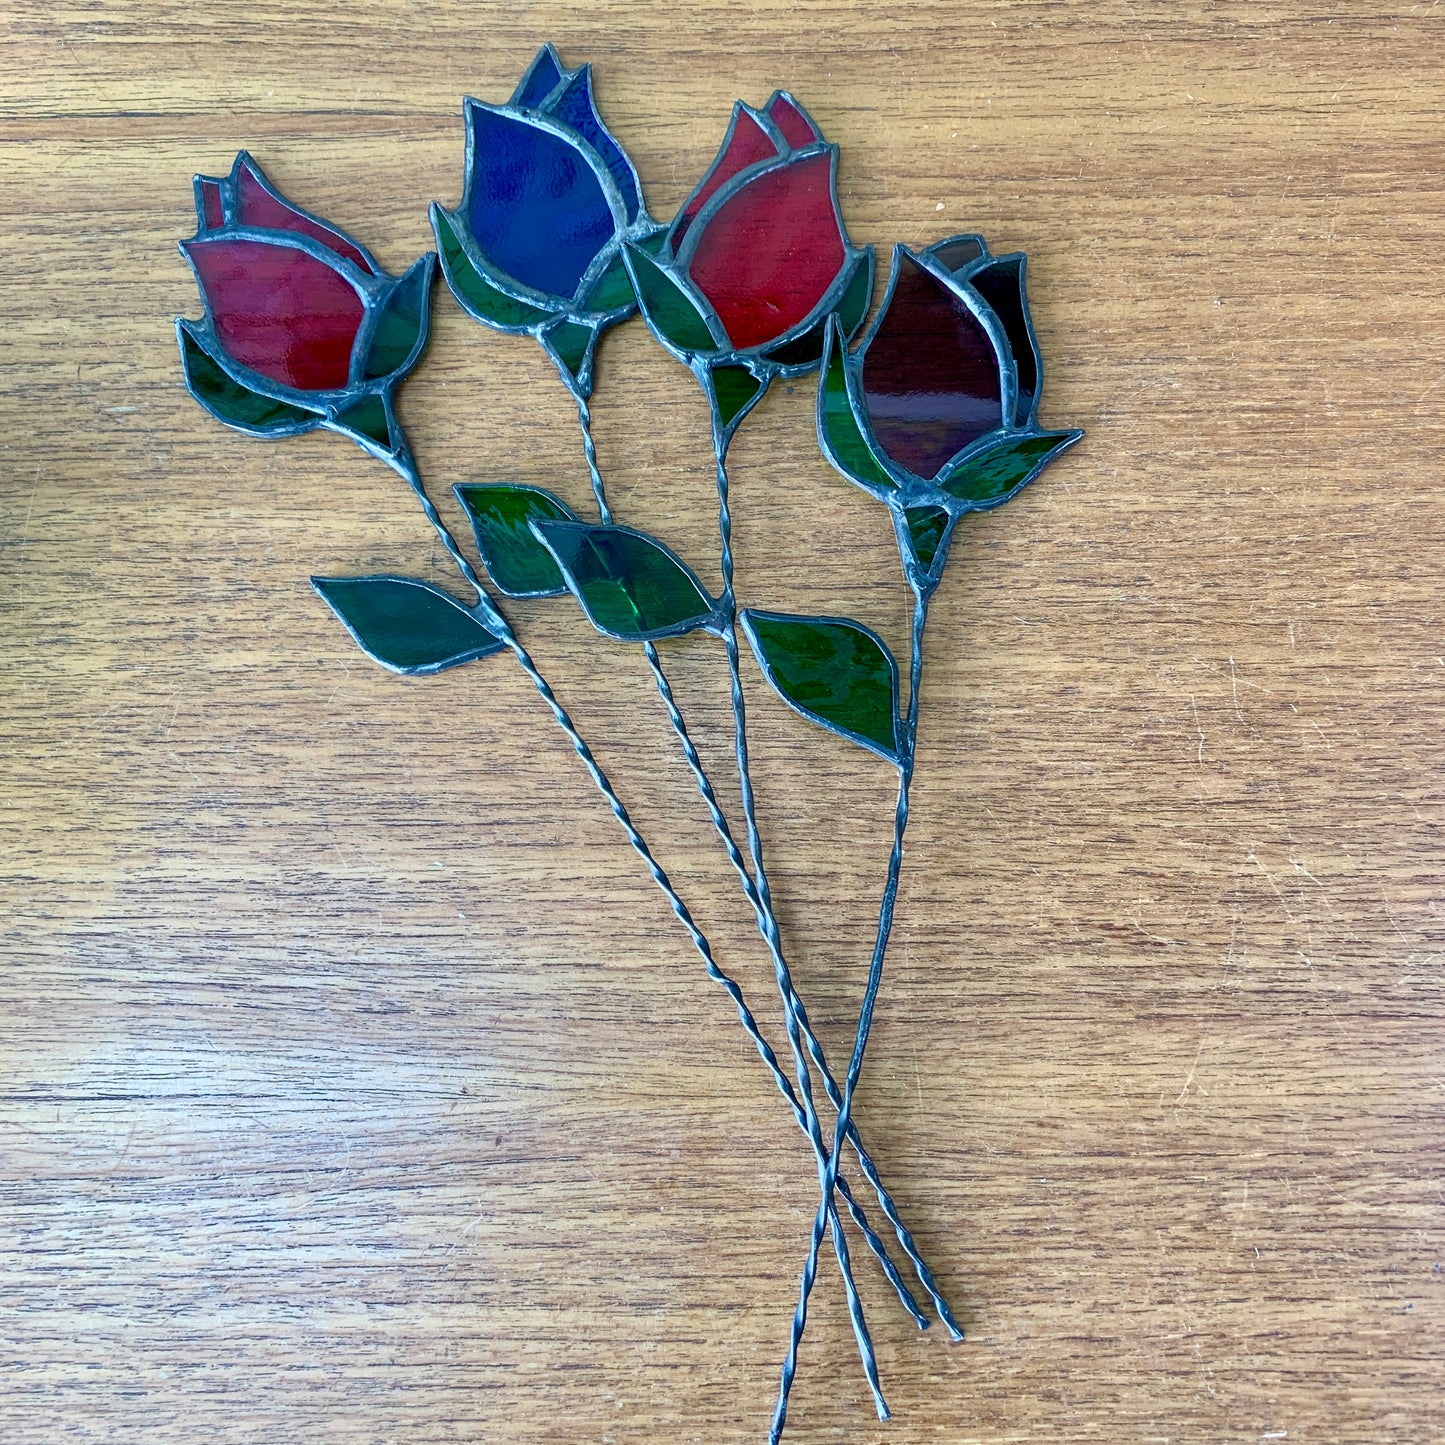 A stained glass rose bud on a copperwire stem.